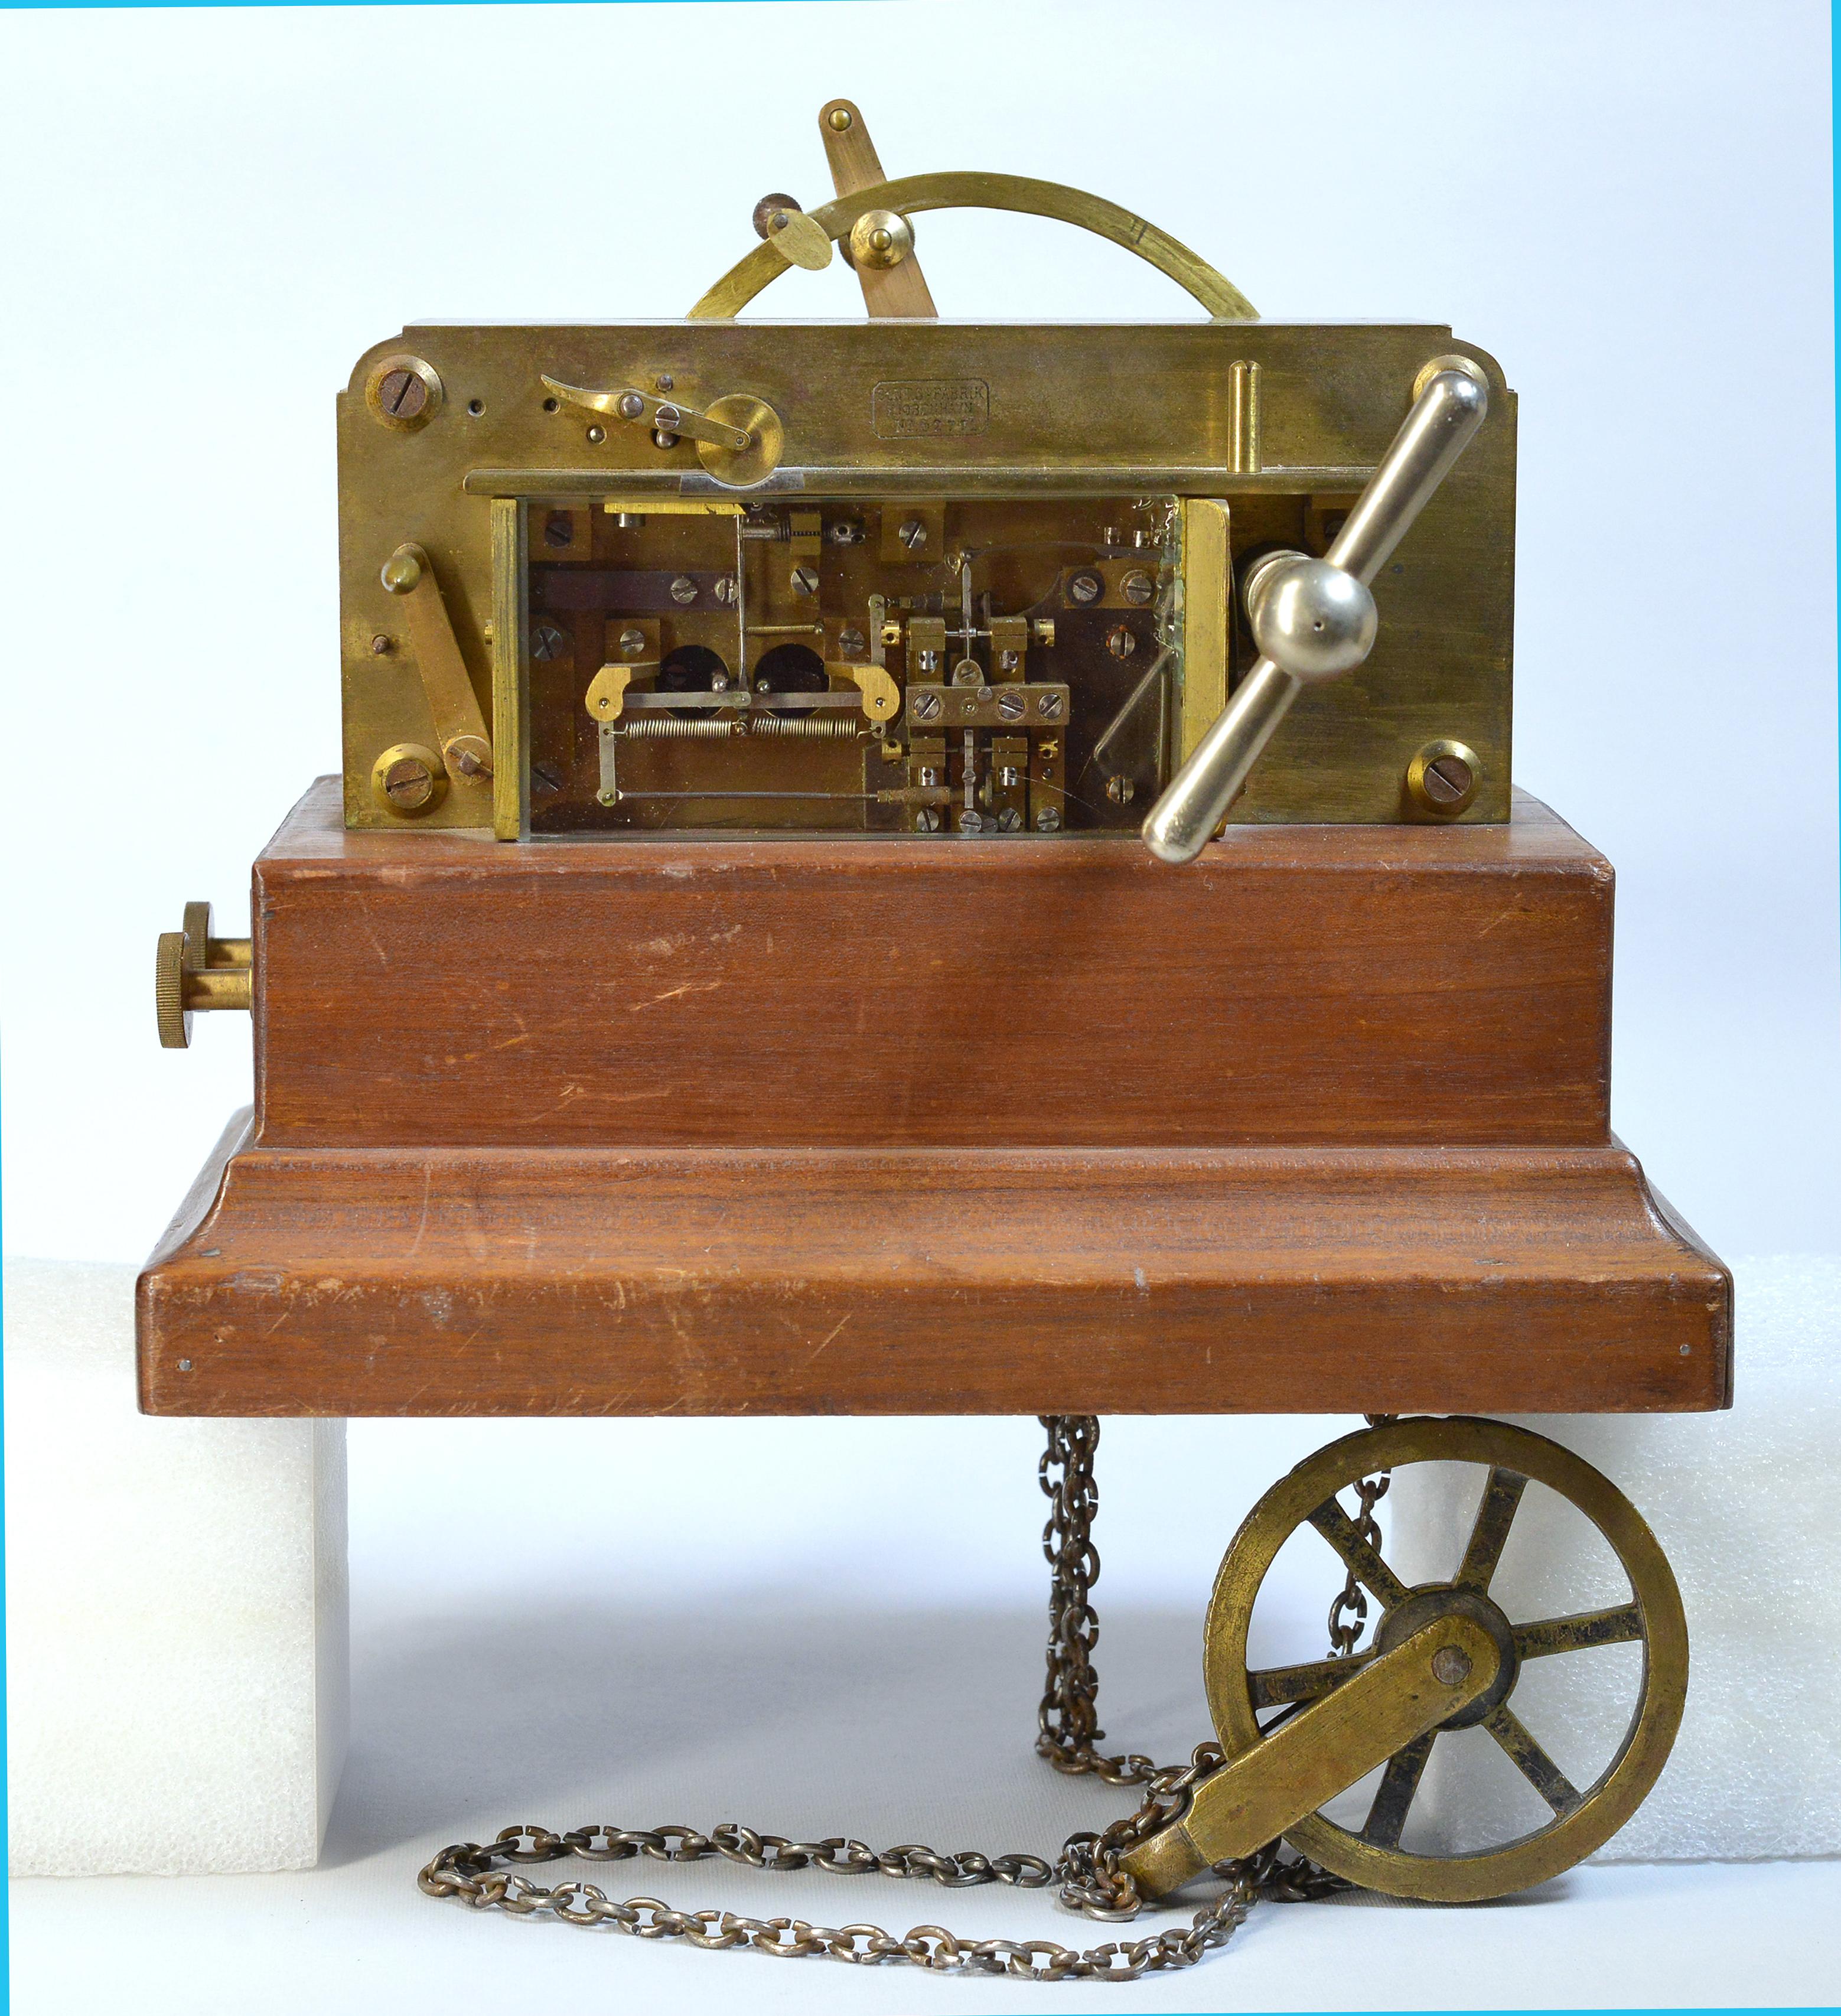 The telegraph apparatus made in late 19th century and was driven by weight on chain like Old Father clock.
The brass and steel instrument is state of the art creation by legendary Danish engineers. Register serial 52771. Size app.: 19 cm high (7”)